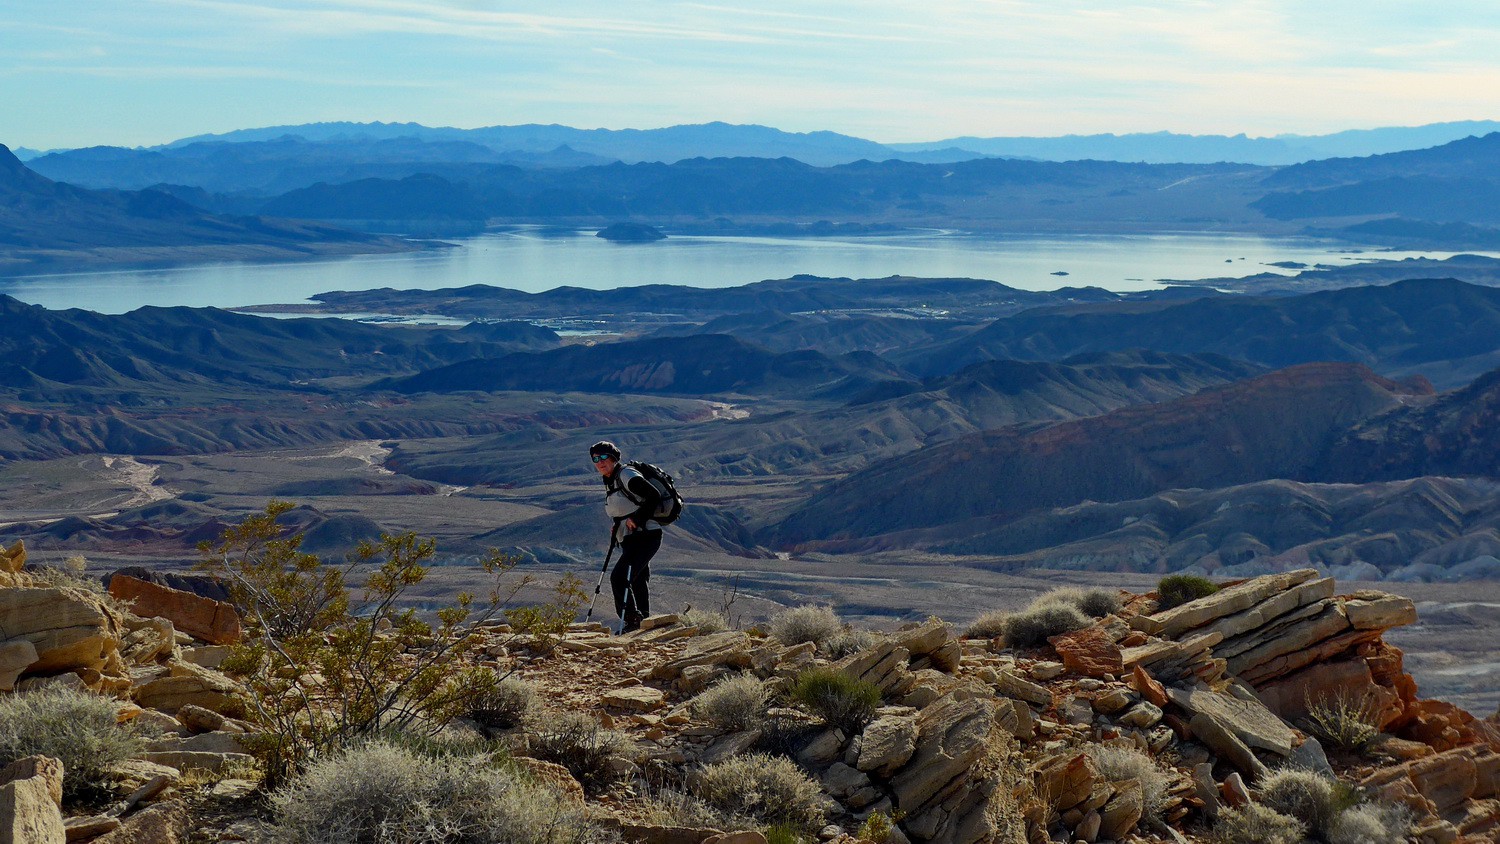 Marion on the final ridge of Anniversary Peak with Lake Mead in th background